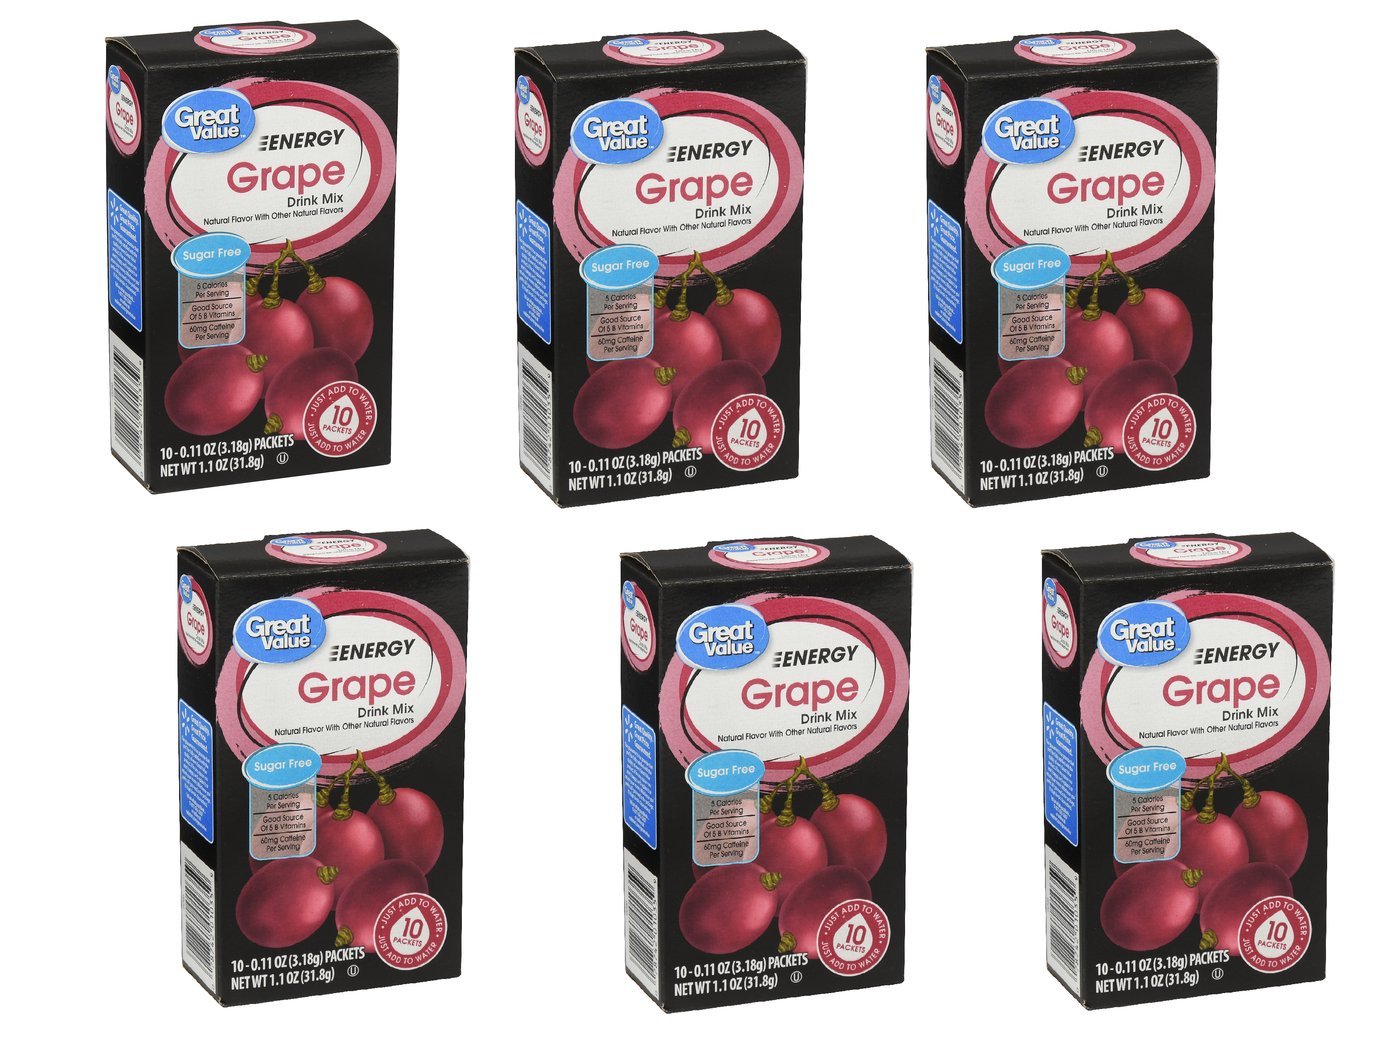 Great Value Grape Energy Drink Mix, 10ct (Pack of 6)